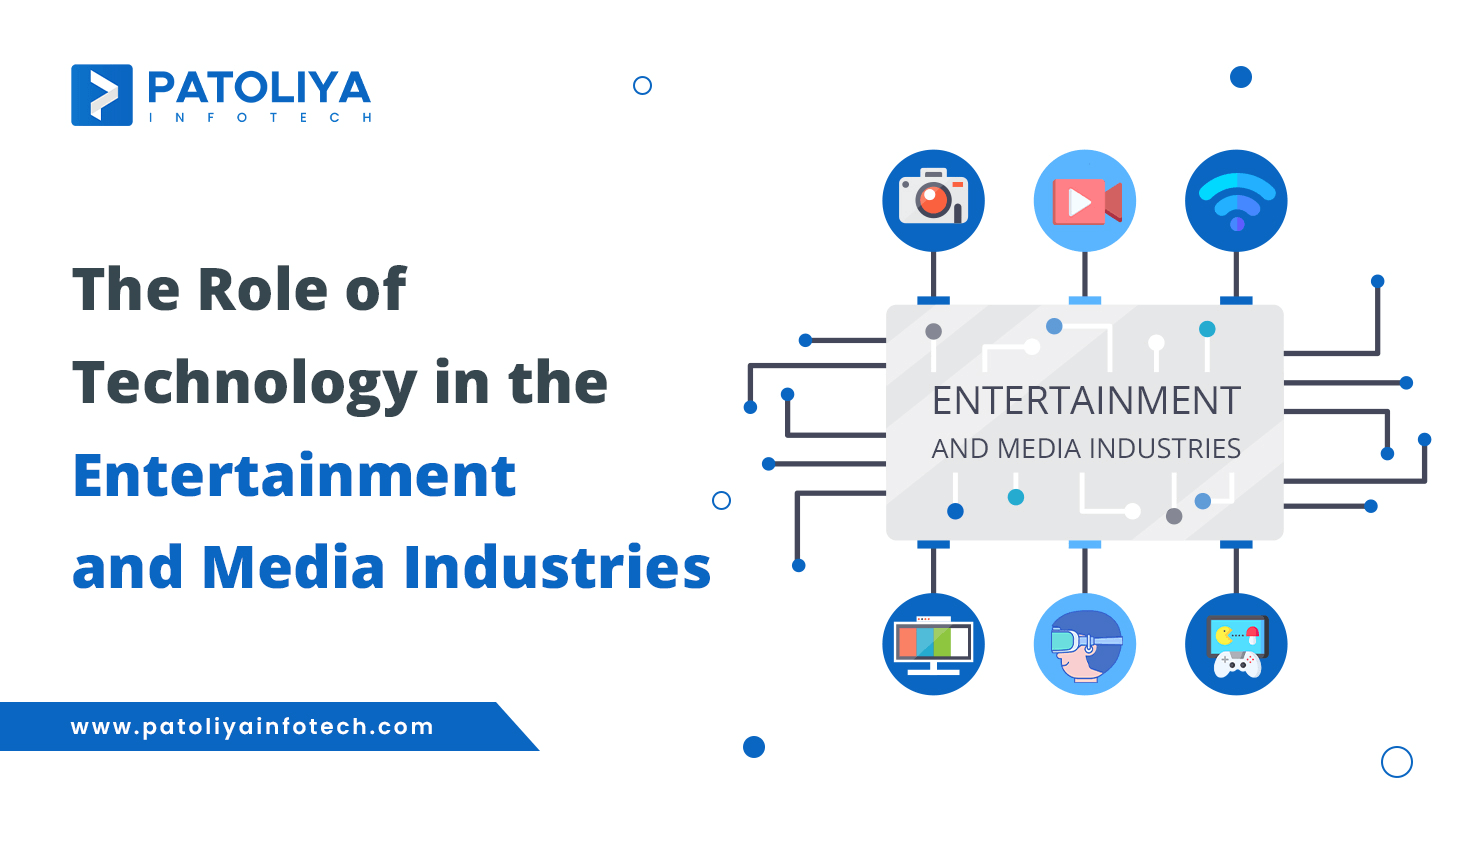 The Role of Technology in the Entertainment & Media Industries